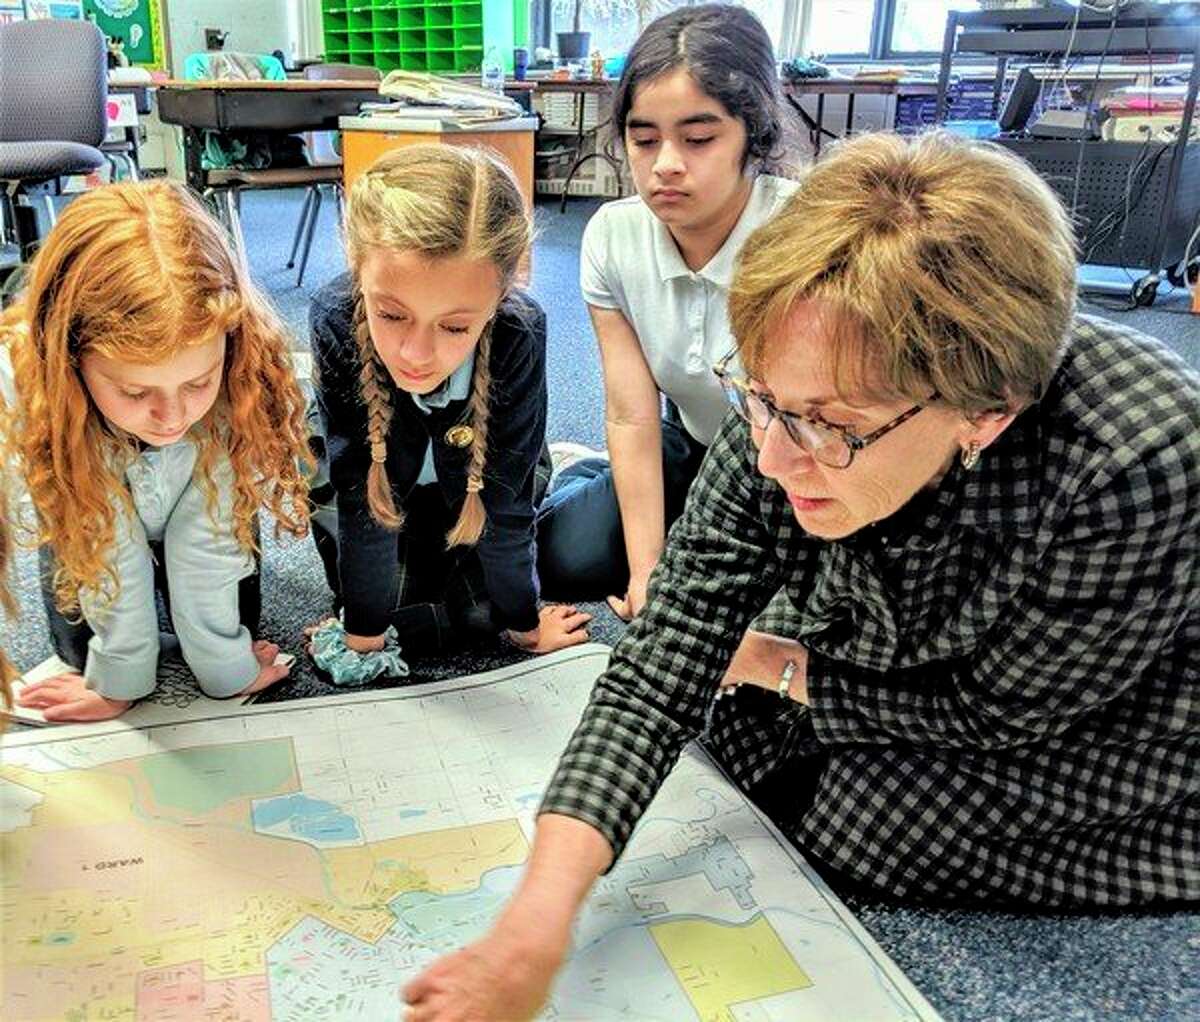 From left, Blessed Sacrament School fifth-graders Lindsay Hofmeister, Payton Mathe and Marina Cruz-Wild look on as Mayor Maureen Donker highlights various areas on a map of Midland. (Photo provided)